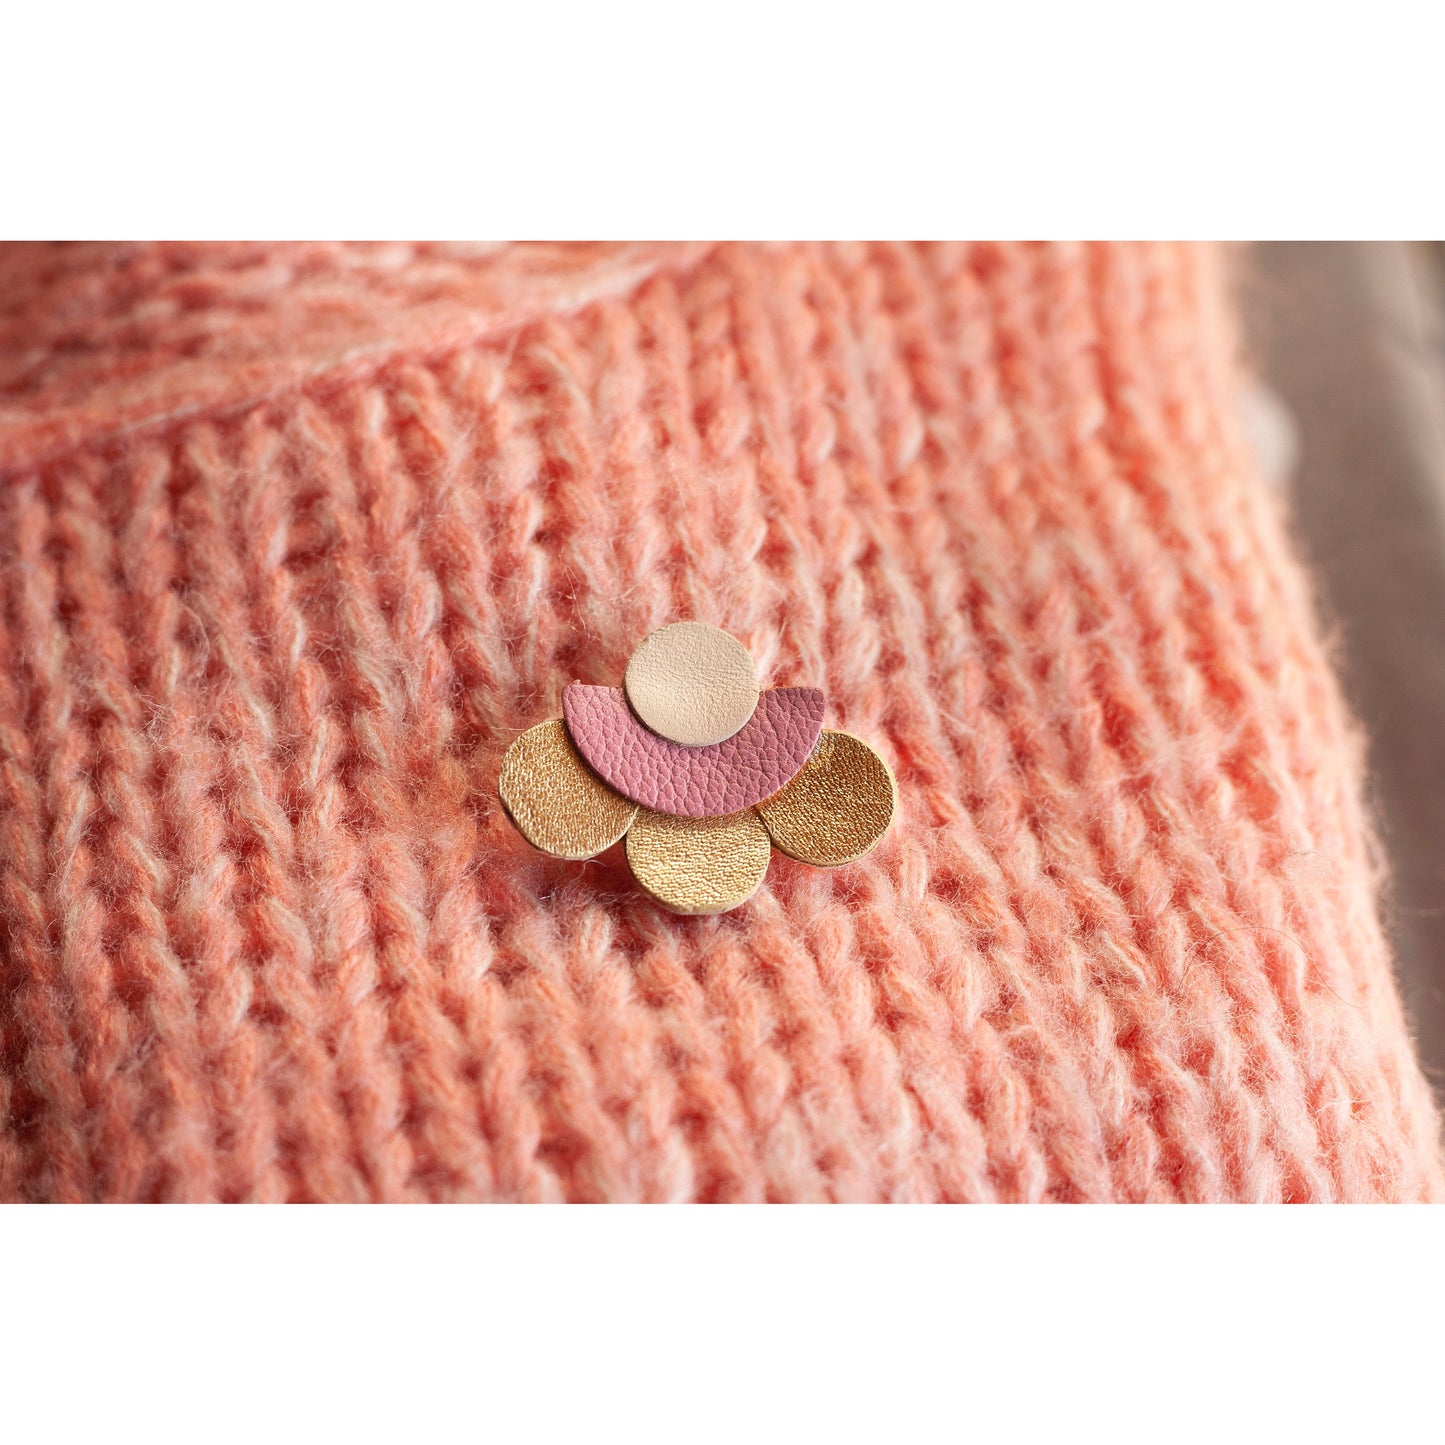 Beige, pink and gold leather flower brooch